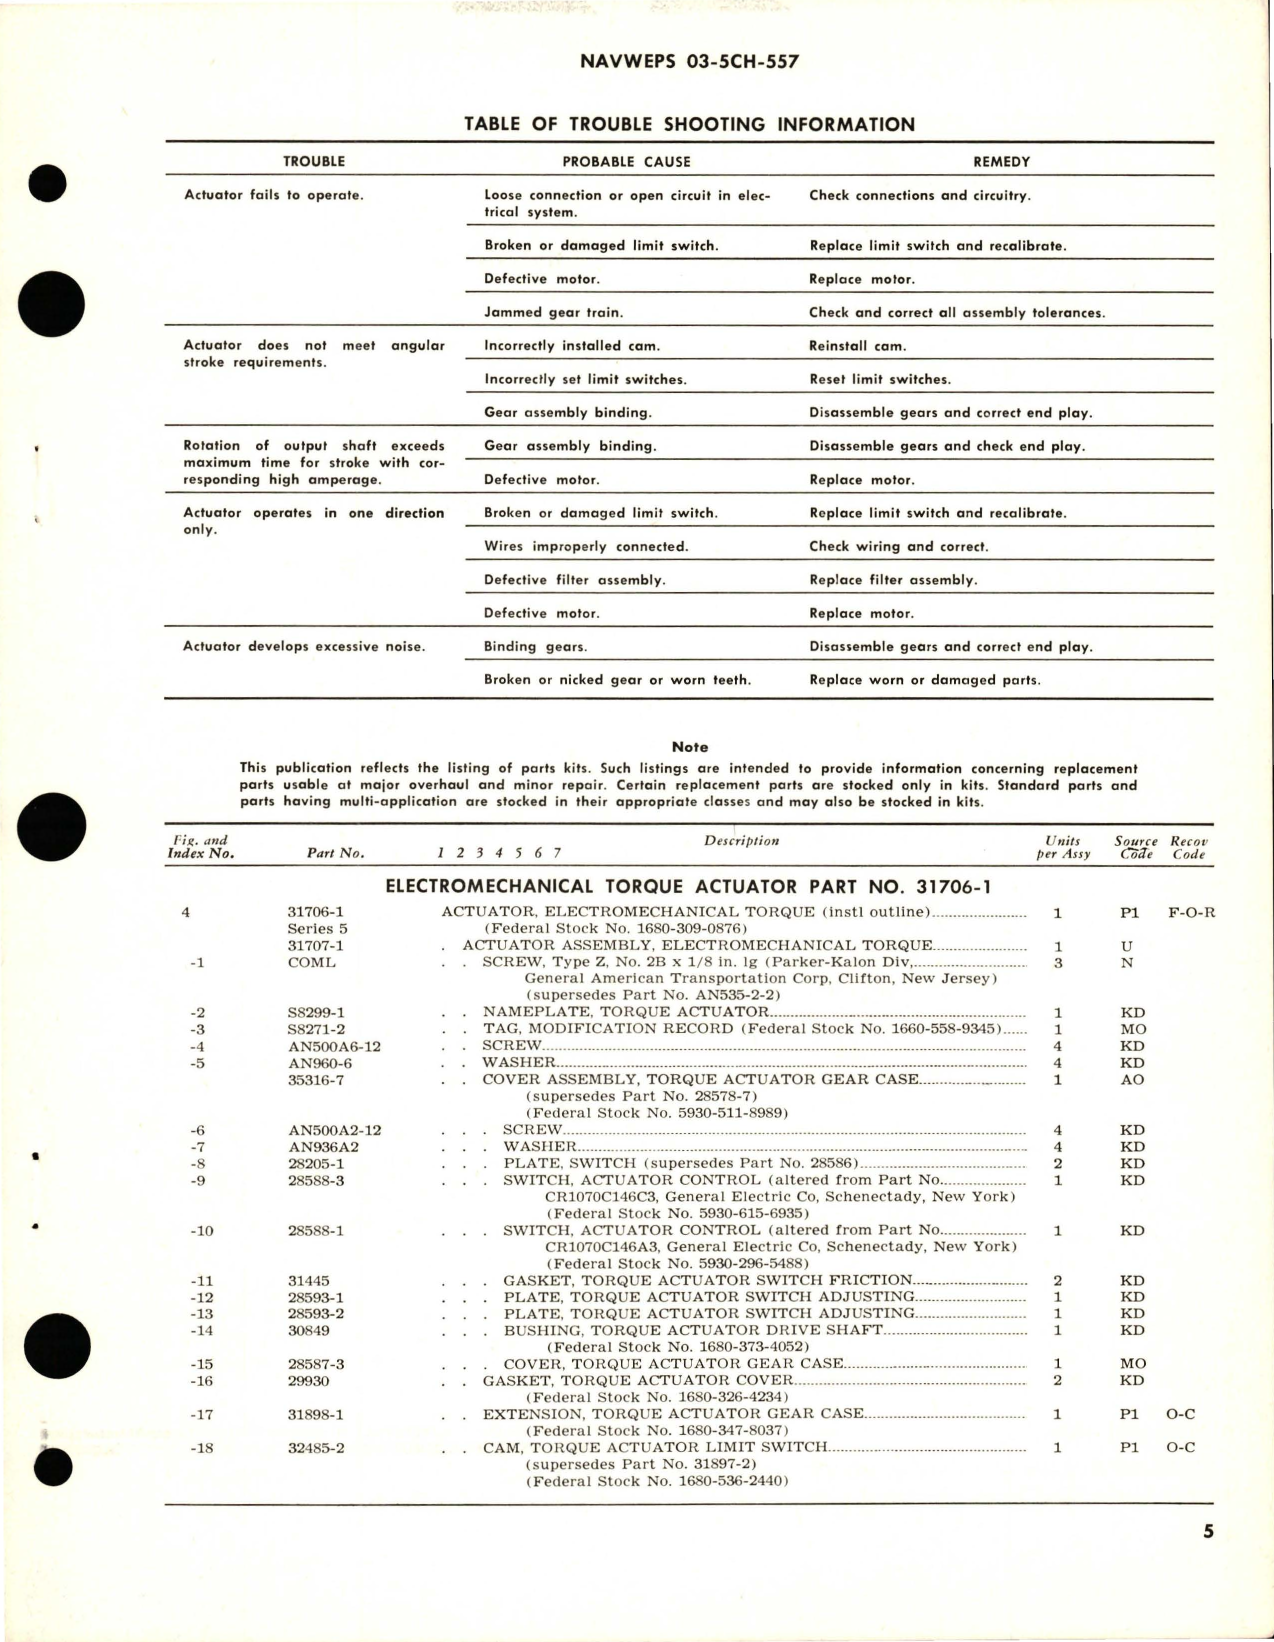 Sample page 5 from AirCorps Library document: Overhaul Instructions with Parts Breakdown for Electromechanical Torque Actuator - Part 31706-1